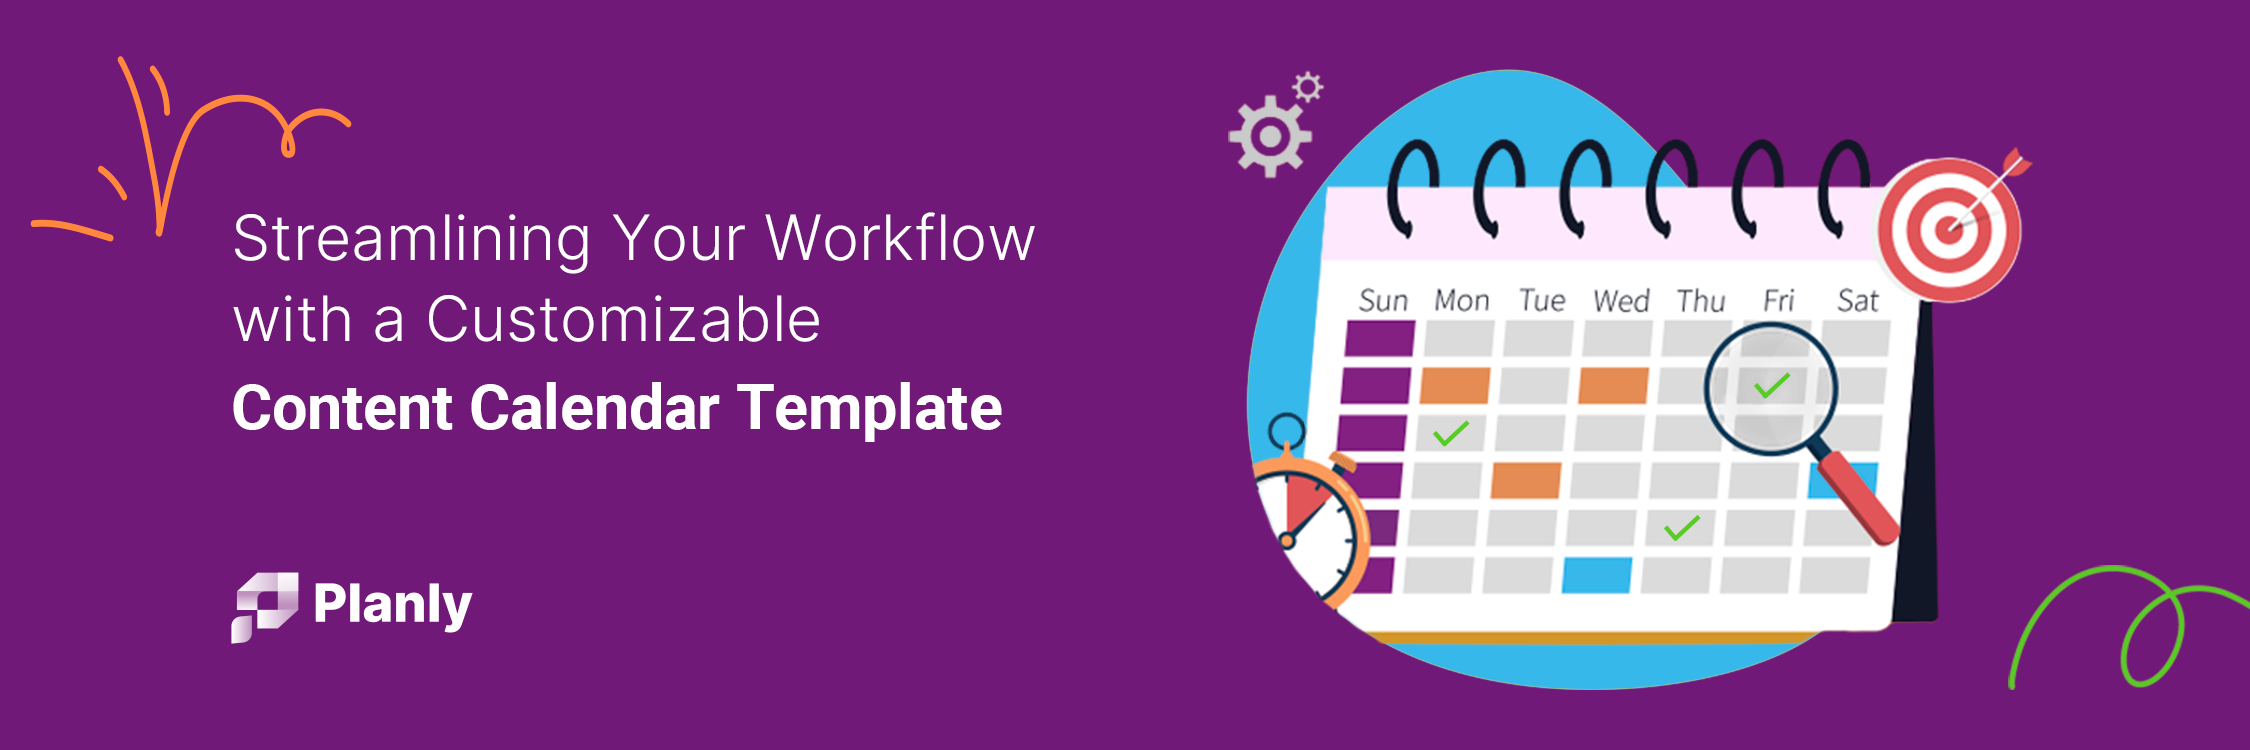 Streamlining Your Workflow with a Customizable Content Calendar Template